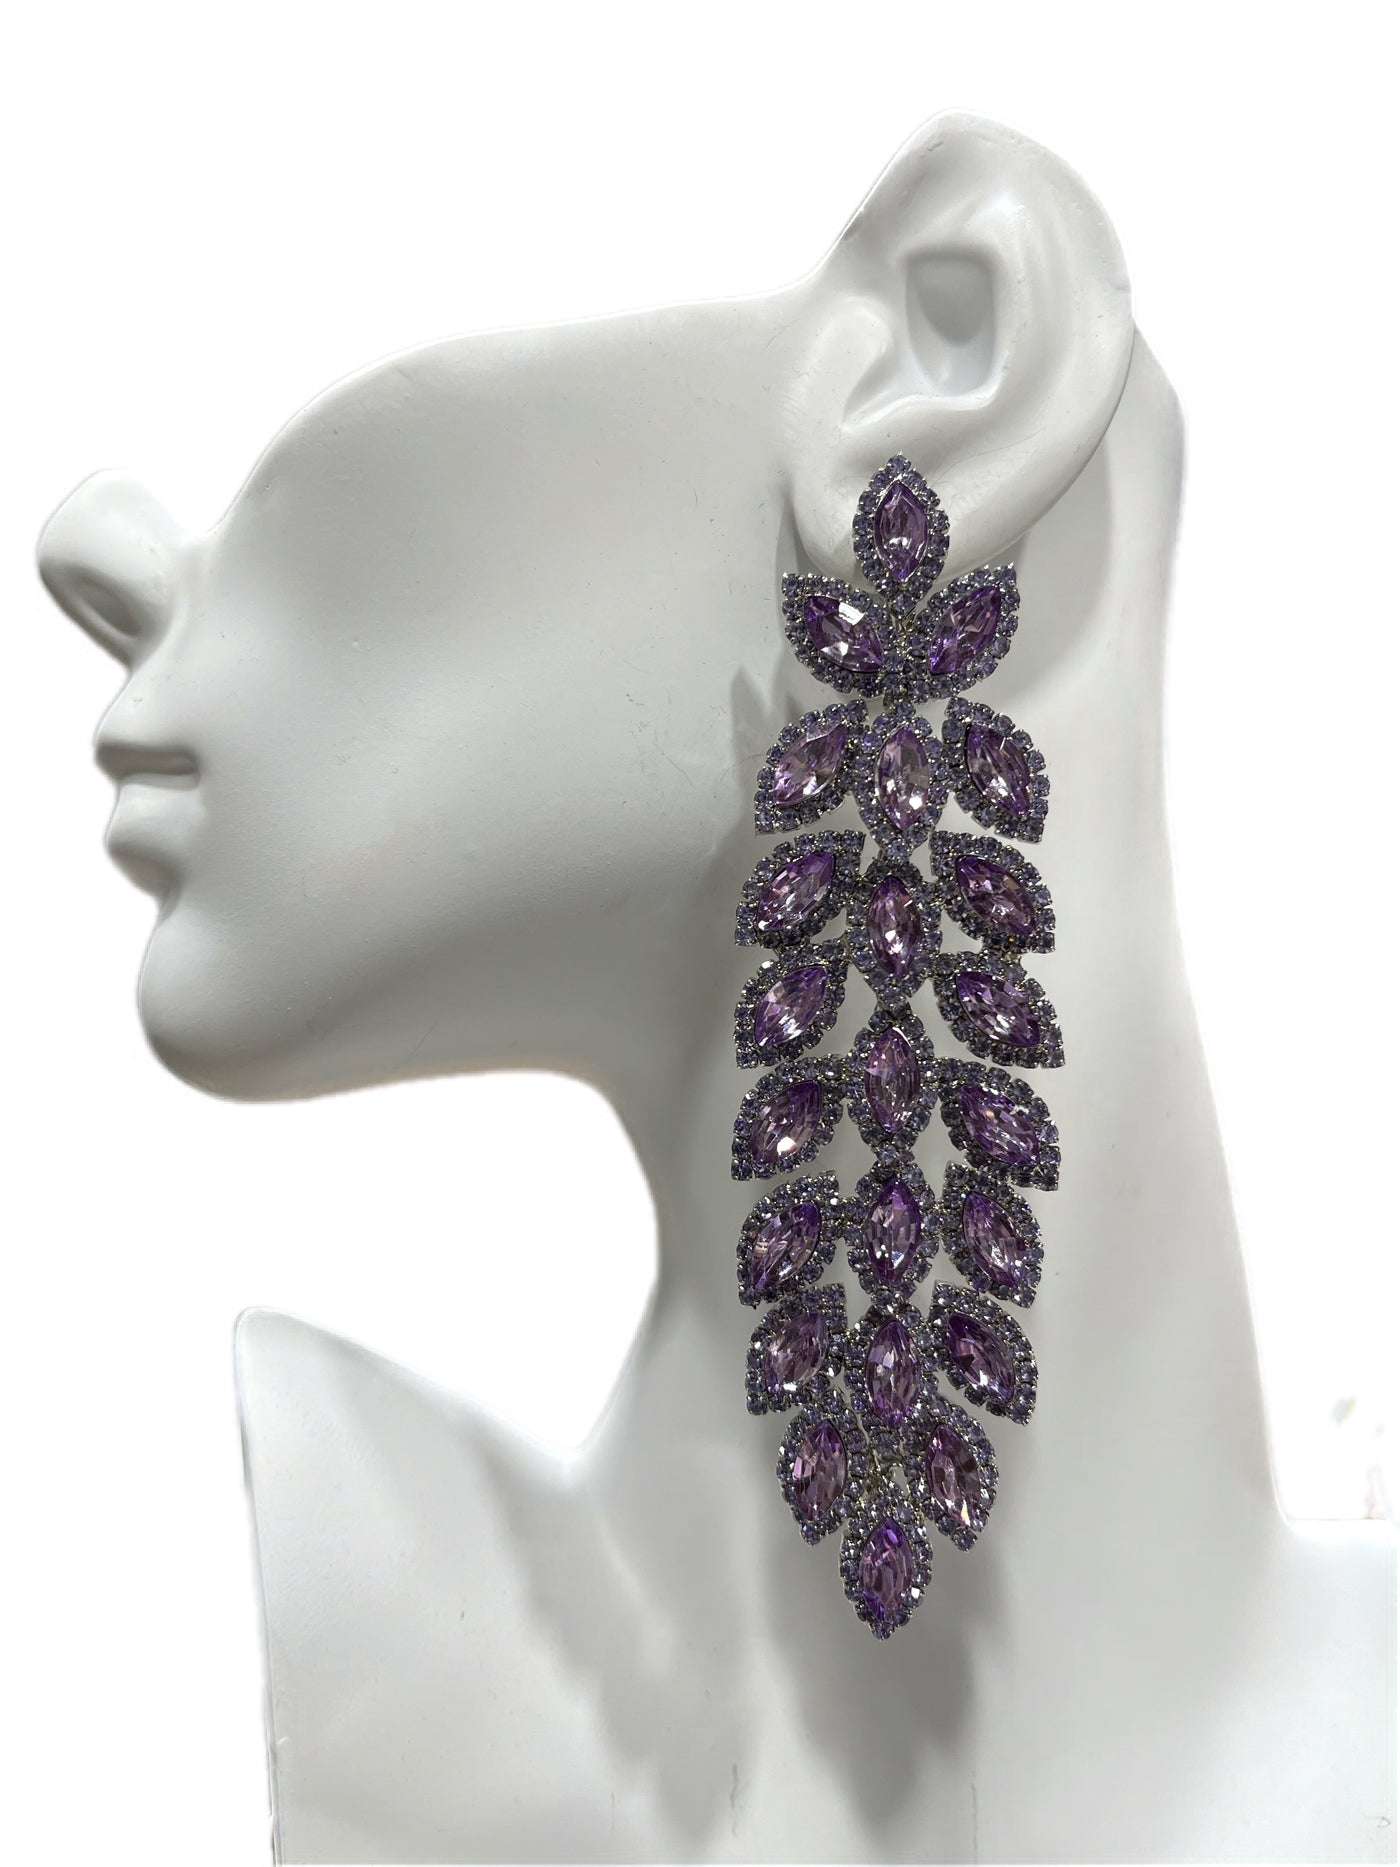 Sparkling Marquise Evening Earrings